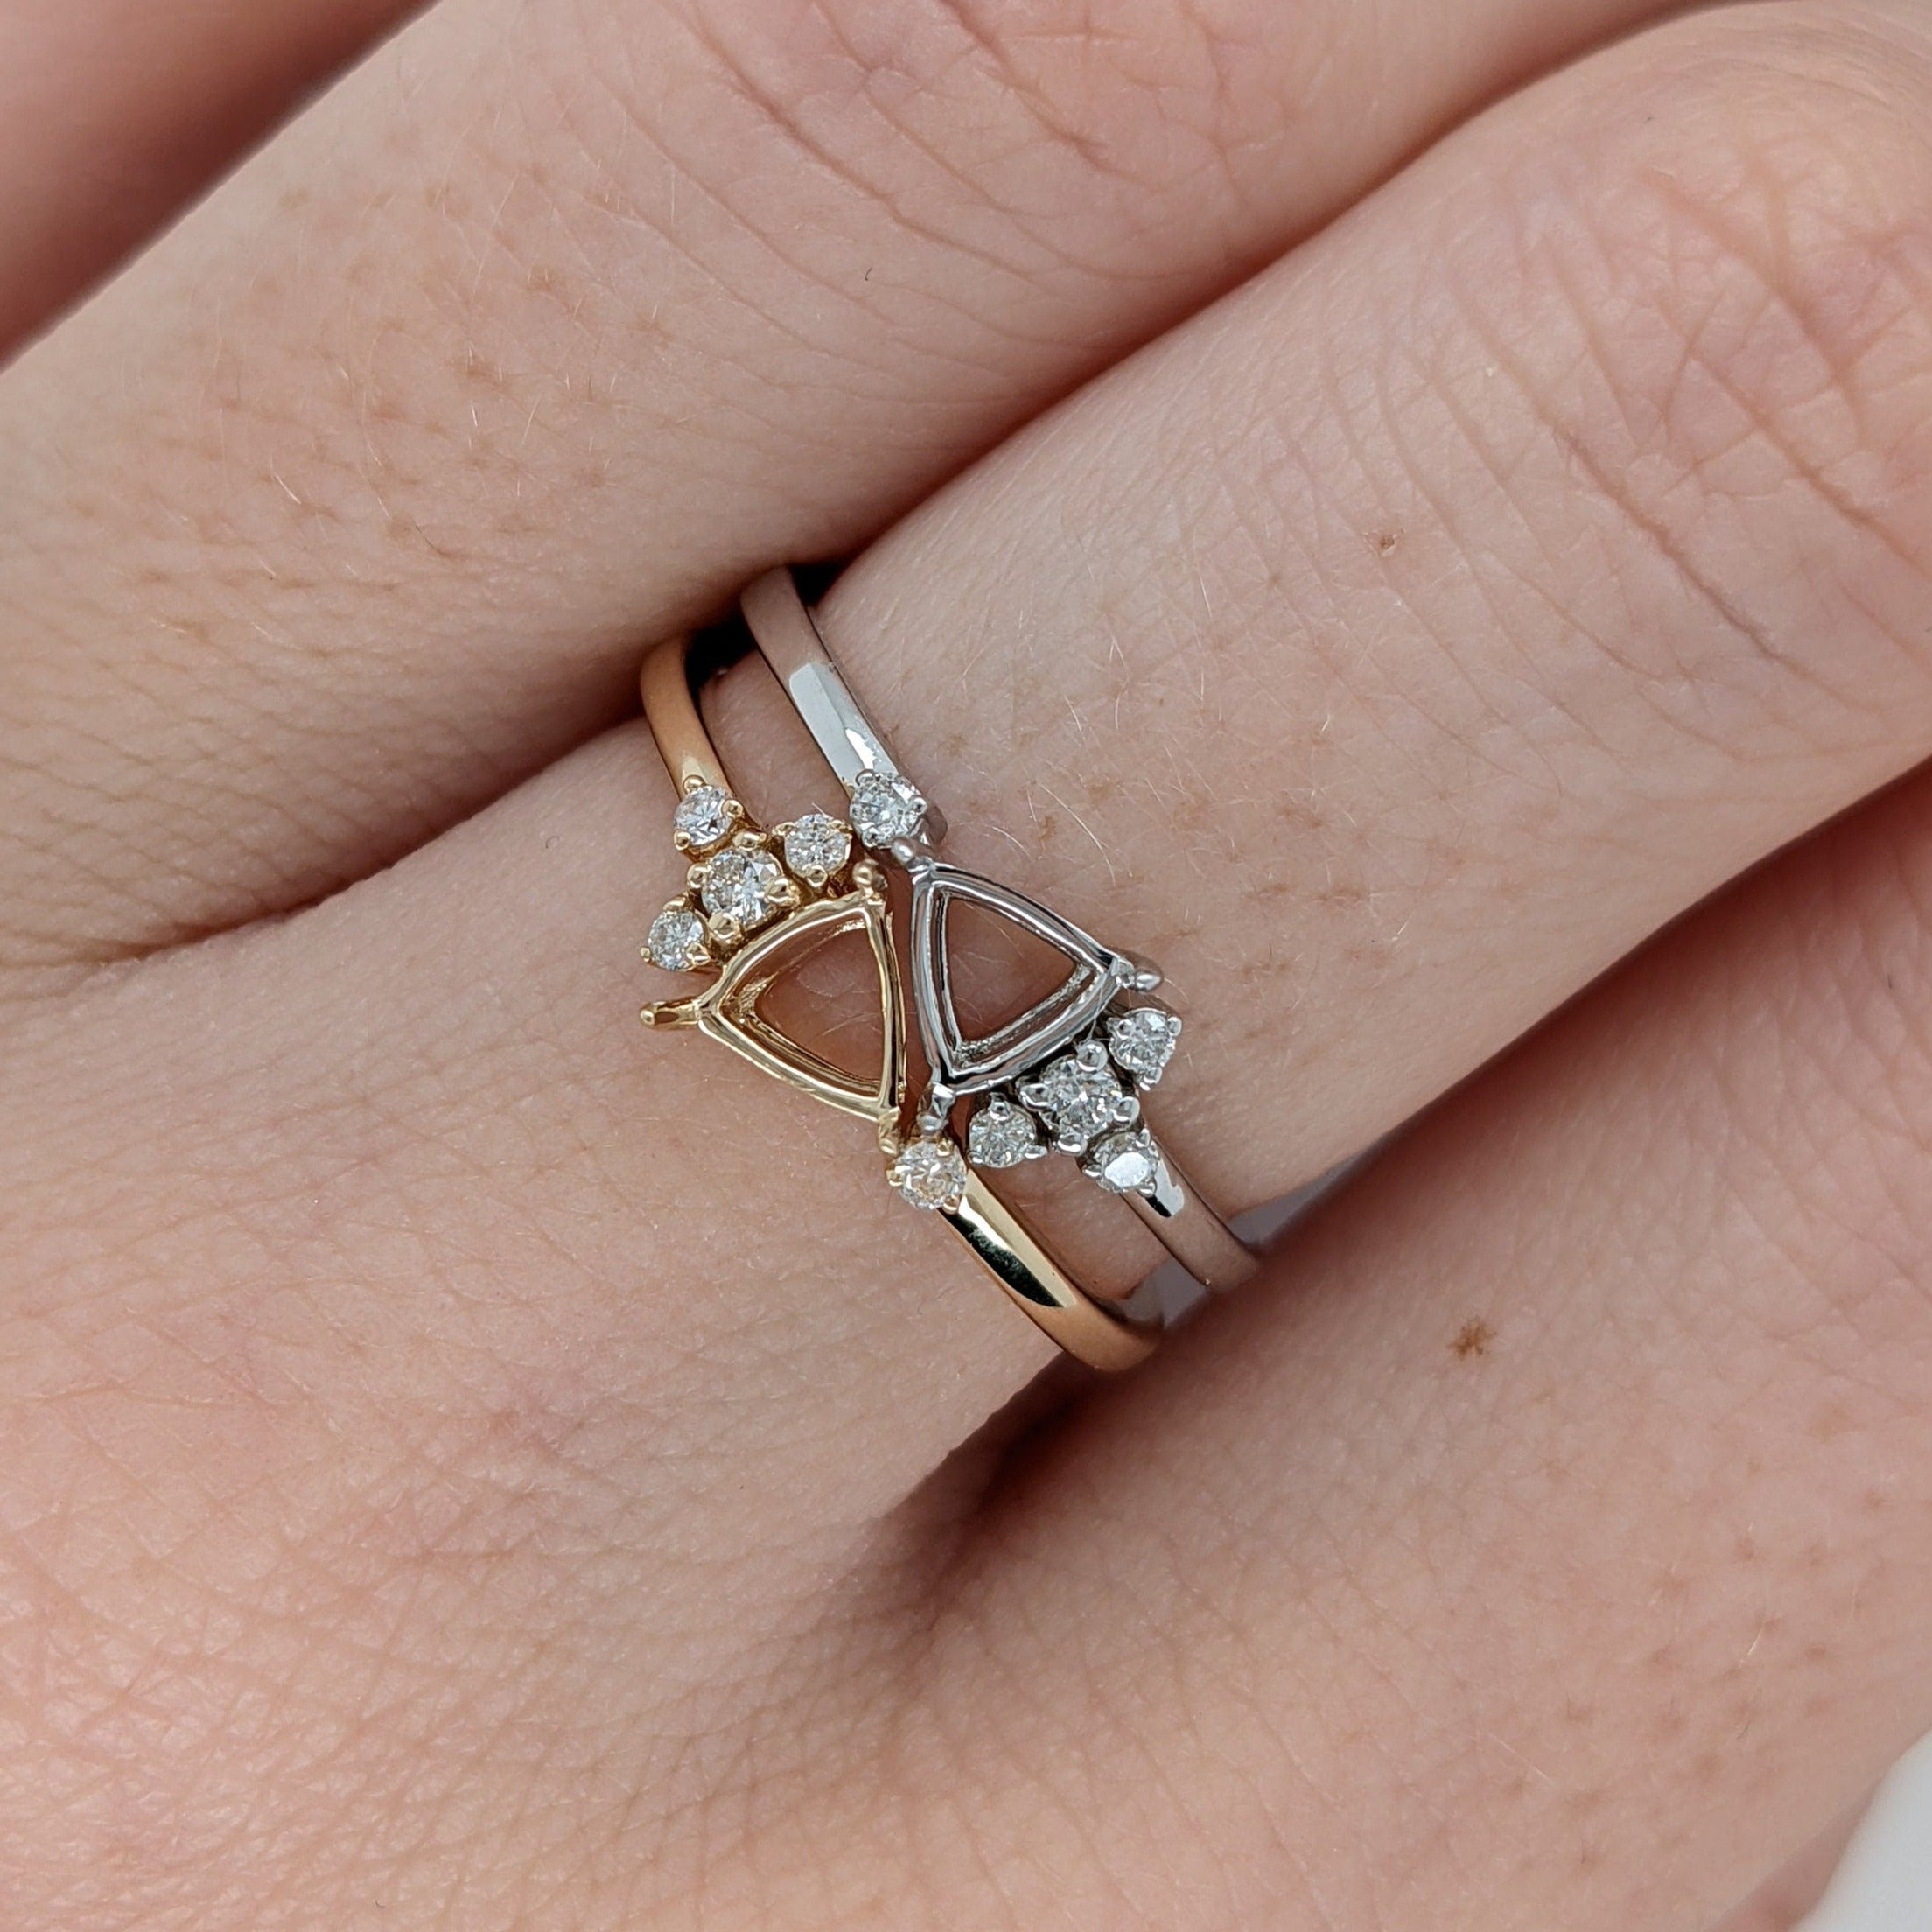 Statement Rings-Unique Stackable Trilliant Cut Ring Semi Mount in 14K Gold w Natural Diamond Accents | Trilliant 5mm | Ying Yang | Custom Jewelry | Gemstone - NNJGemstones